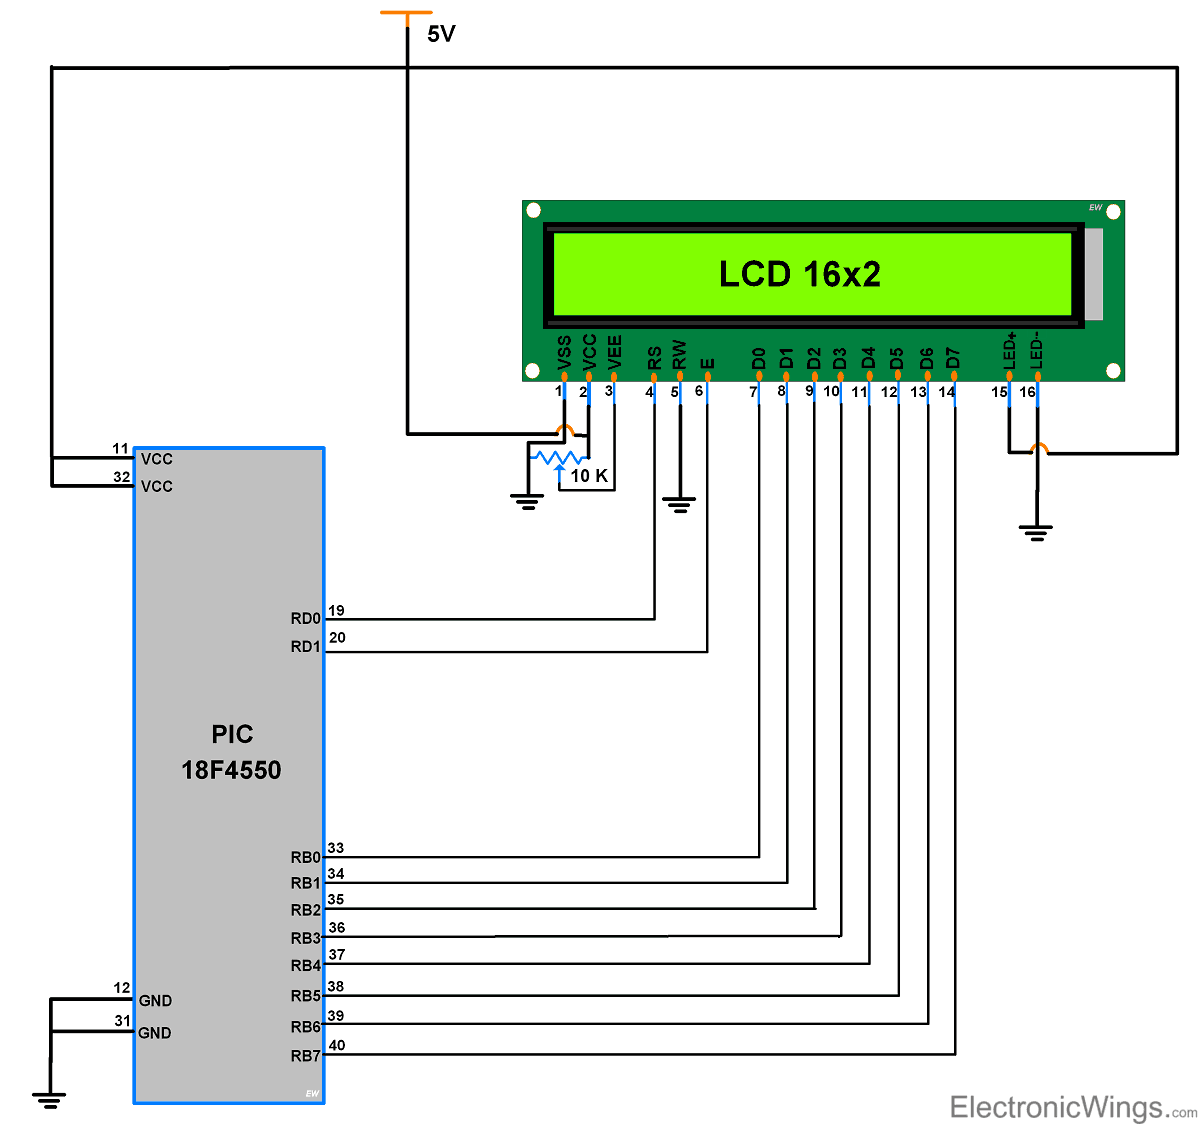 This is the picture of Interfacing LCD16x2 with PIC microcontroller